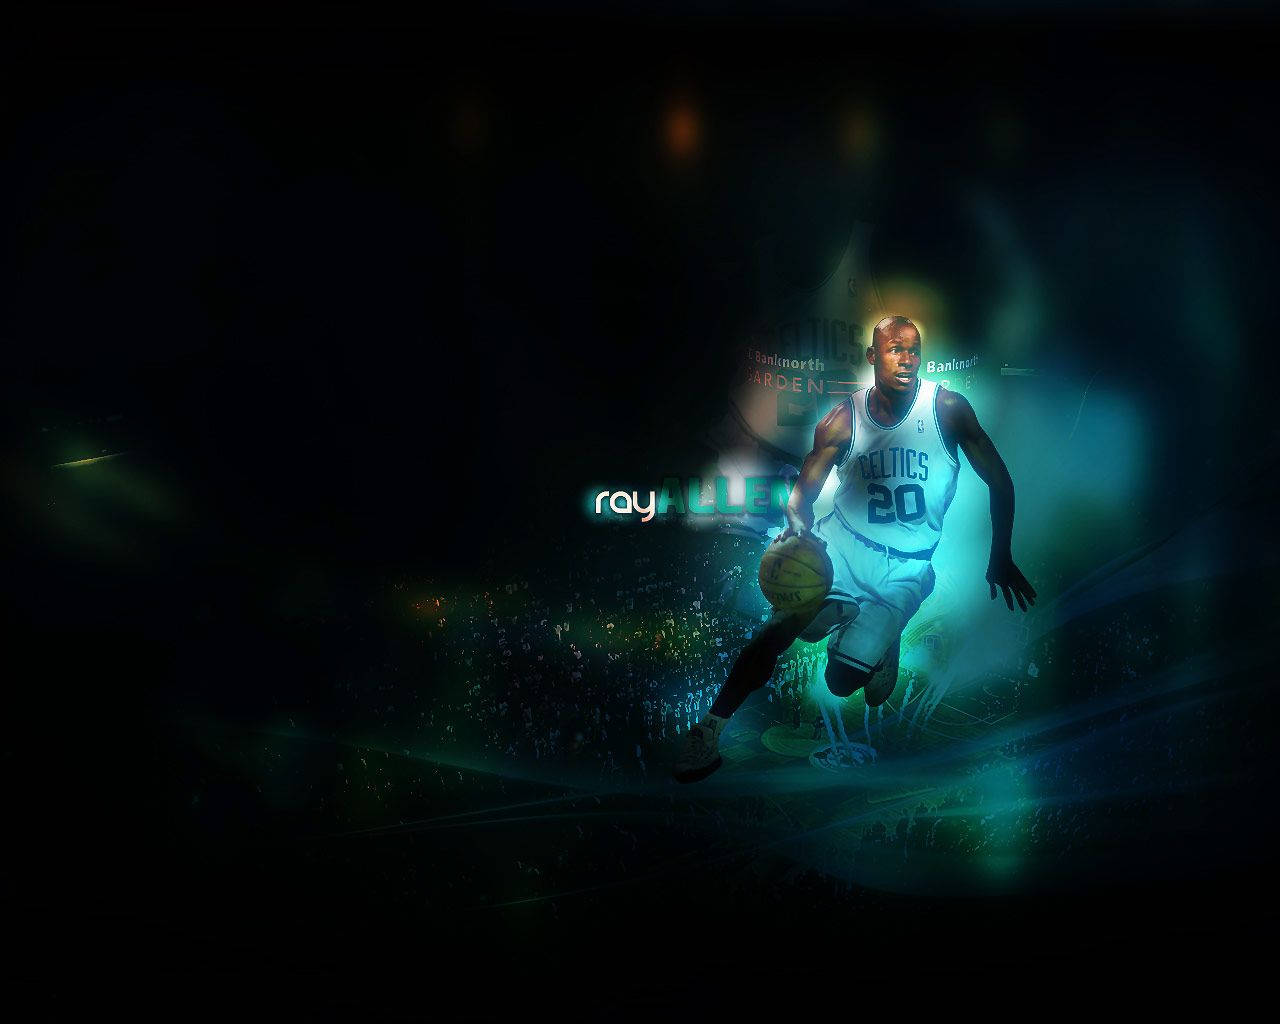 Ray Allen Basketball Dribble Expression Wallpaper